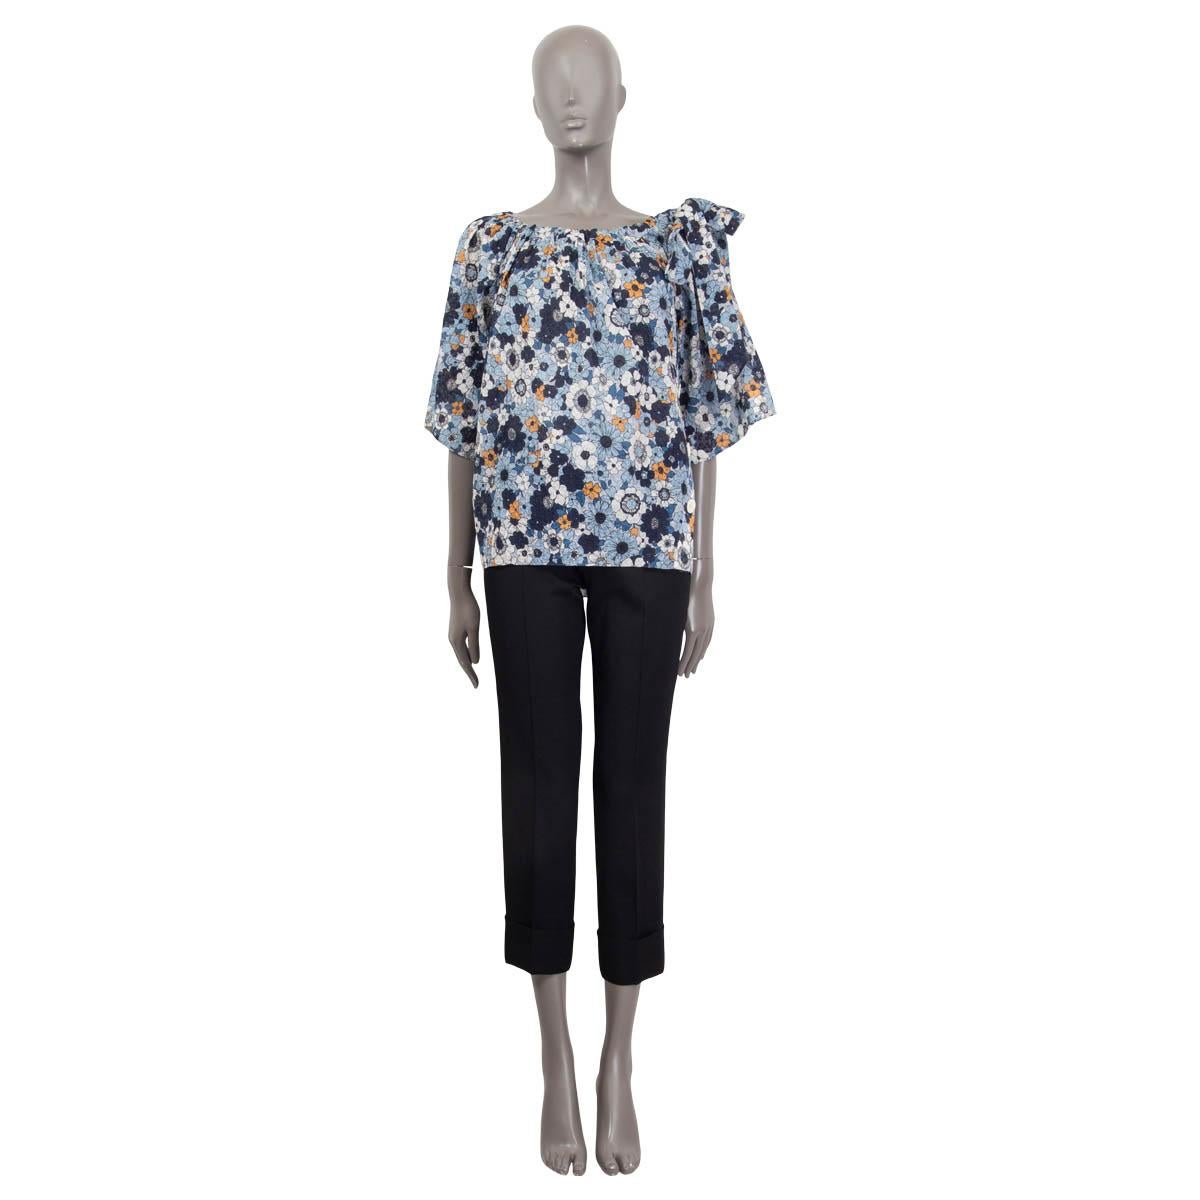 100% authentic Chloé oversized floral print blouse in blue, navy blue, orange and off-white cotton (100%). Features short raglan sleeve (sleeve measurements taken from the neck) and a gauze bow on the shoulder. Opens with four white buttons on both